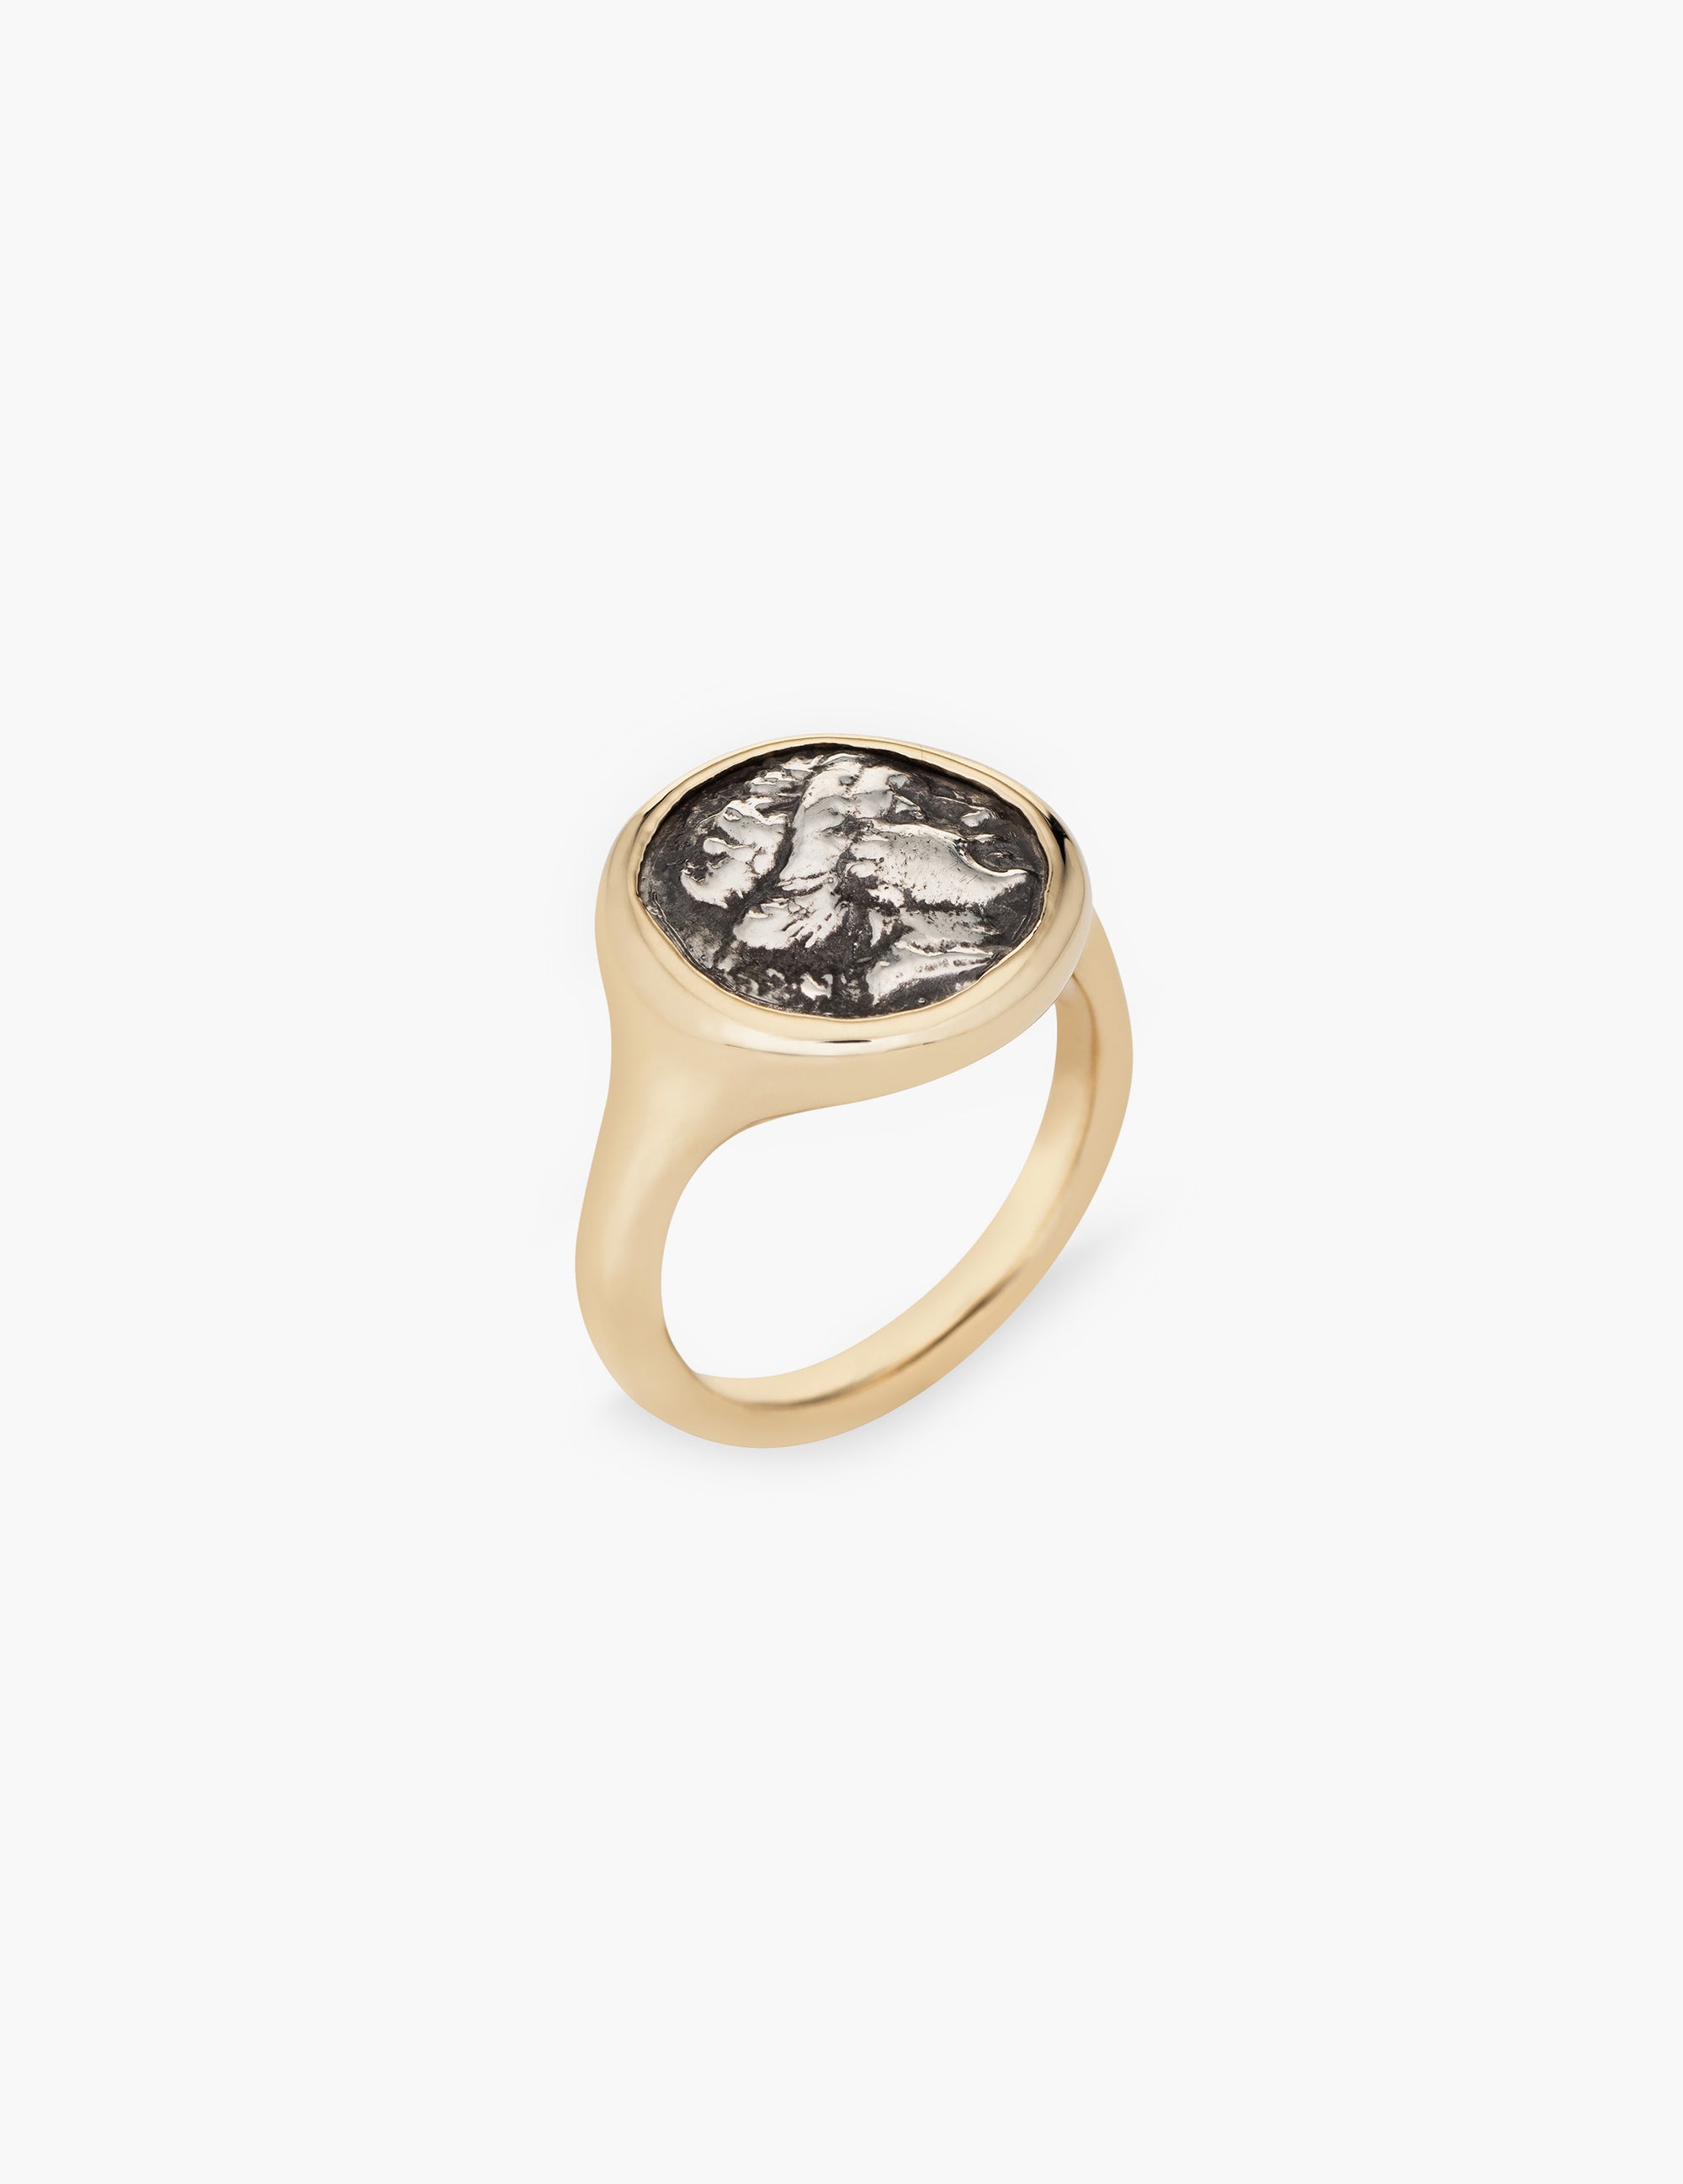 Athena Ring in Gold and Sterling Silver